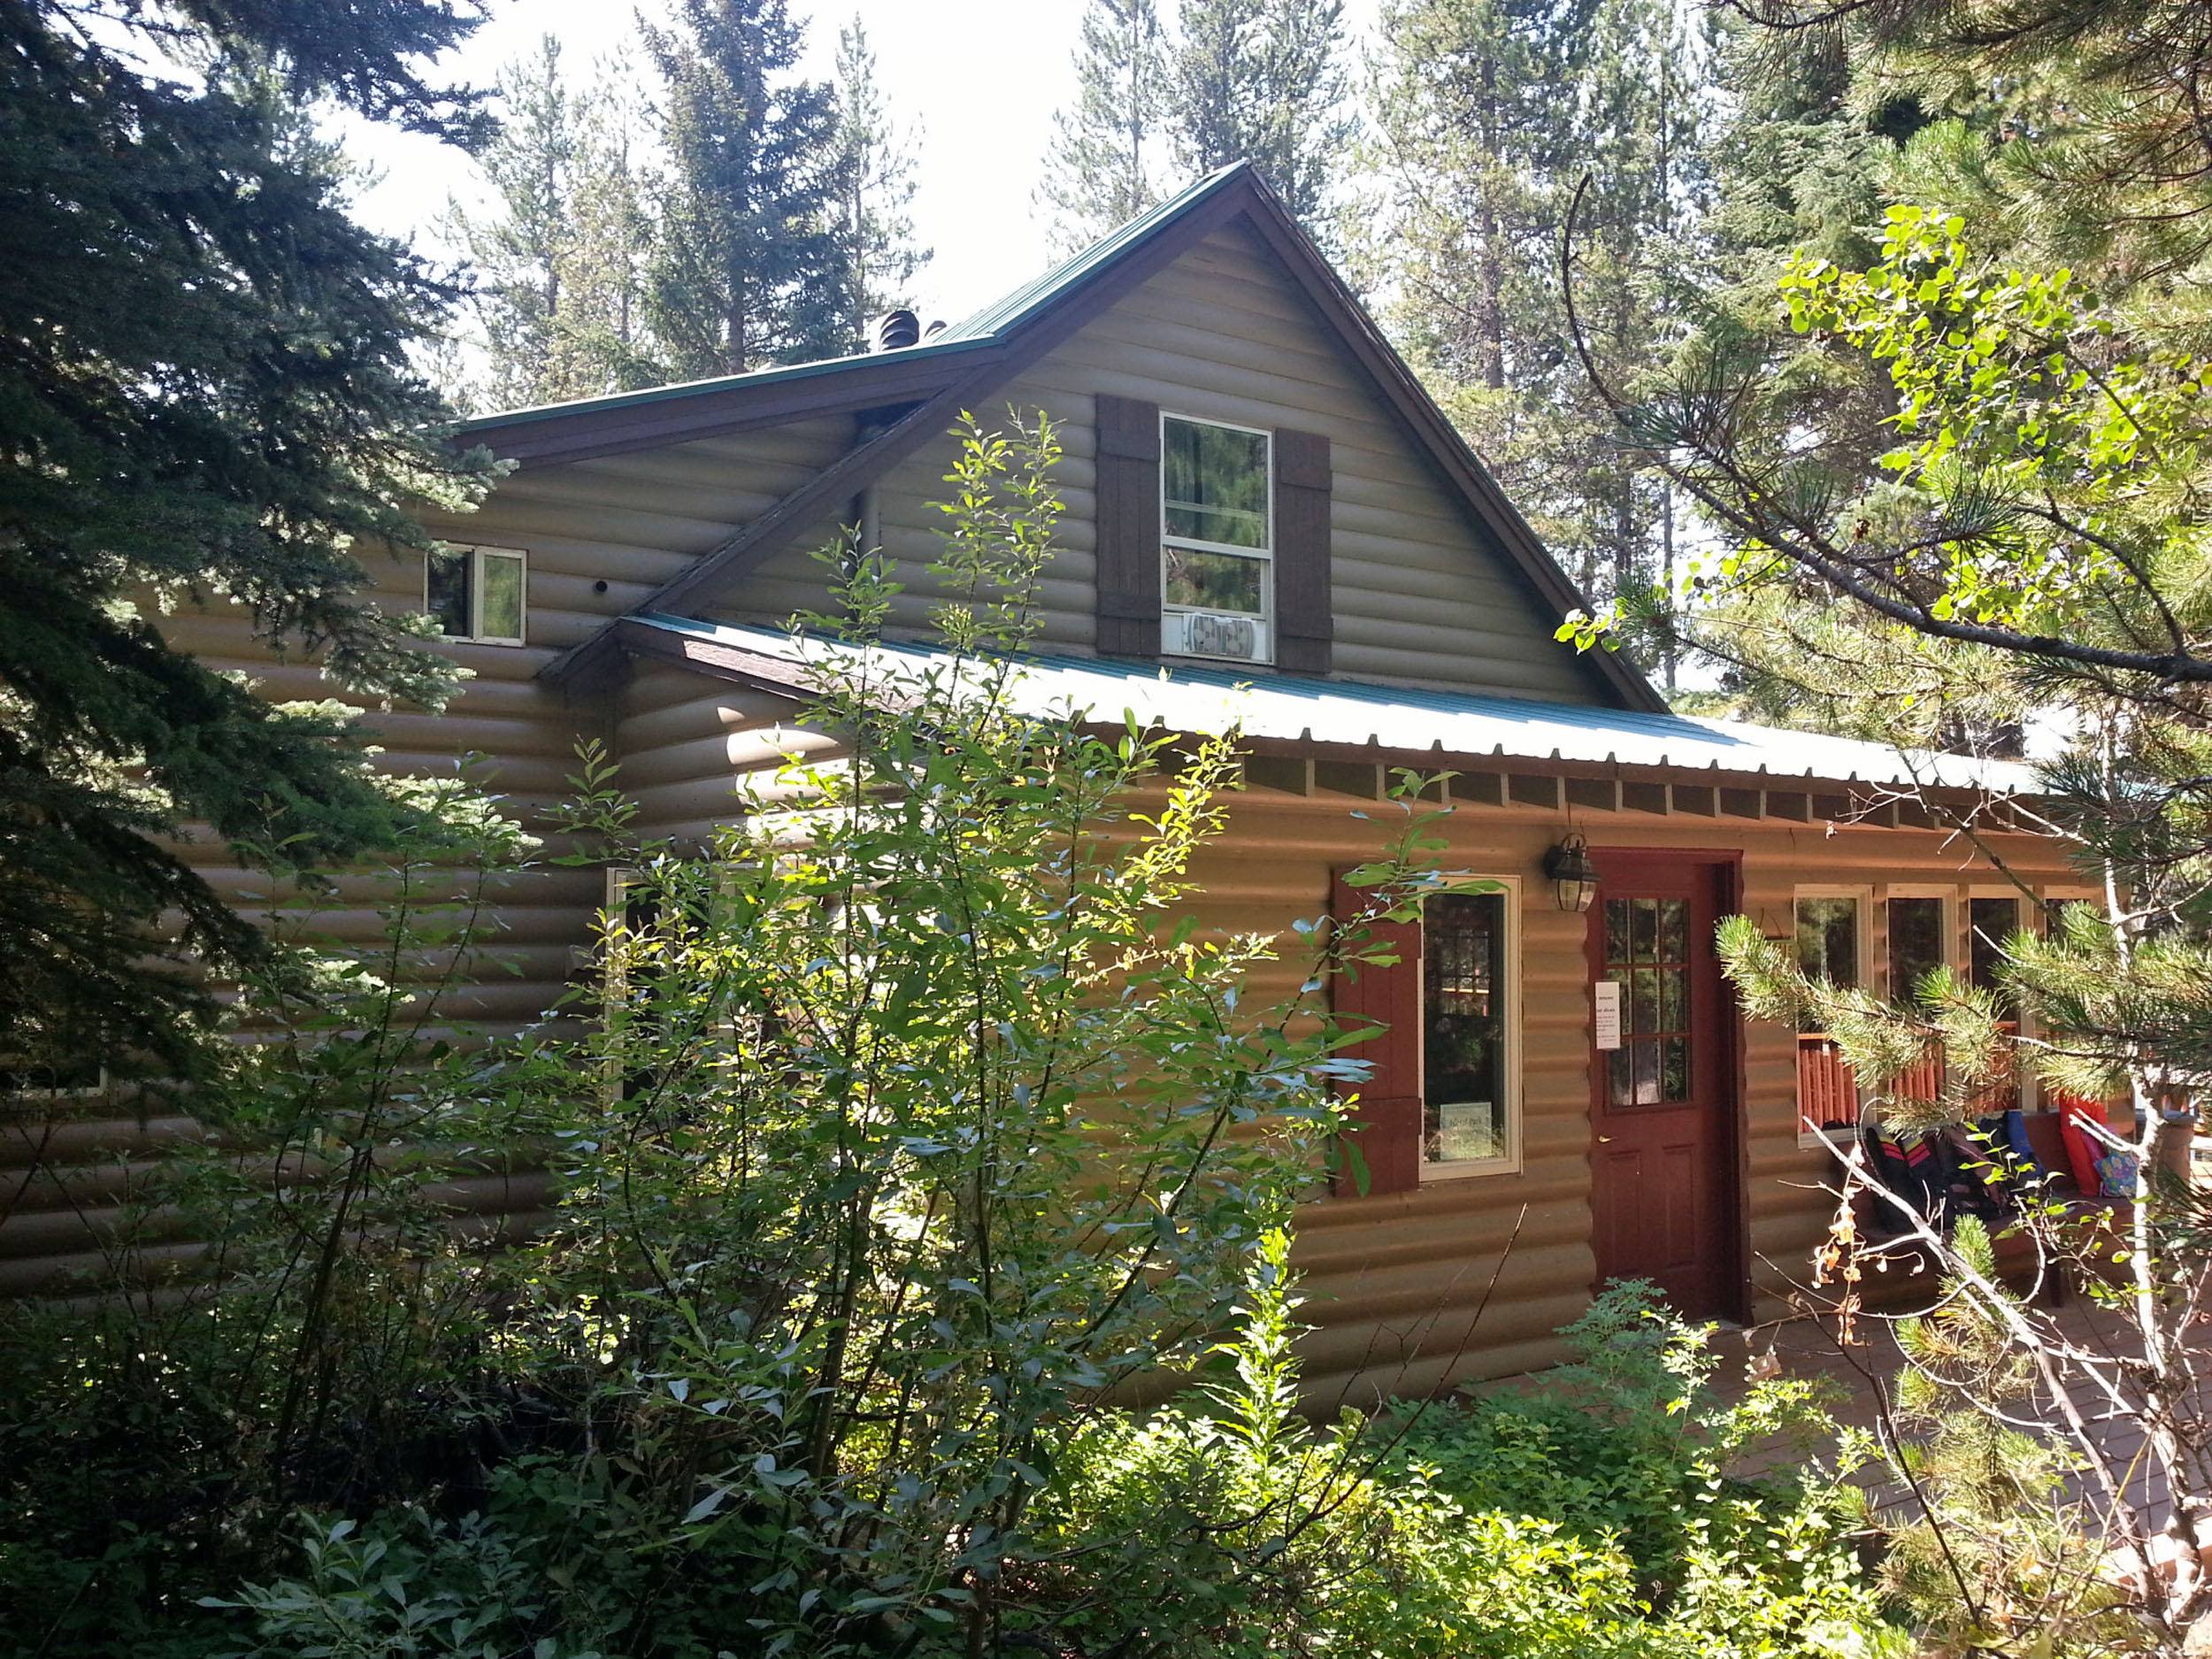 VACATION RENTAL: The Hodgepodge Lodge